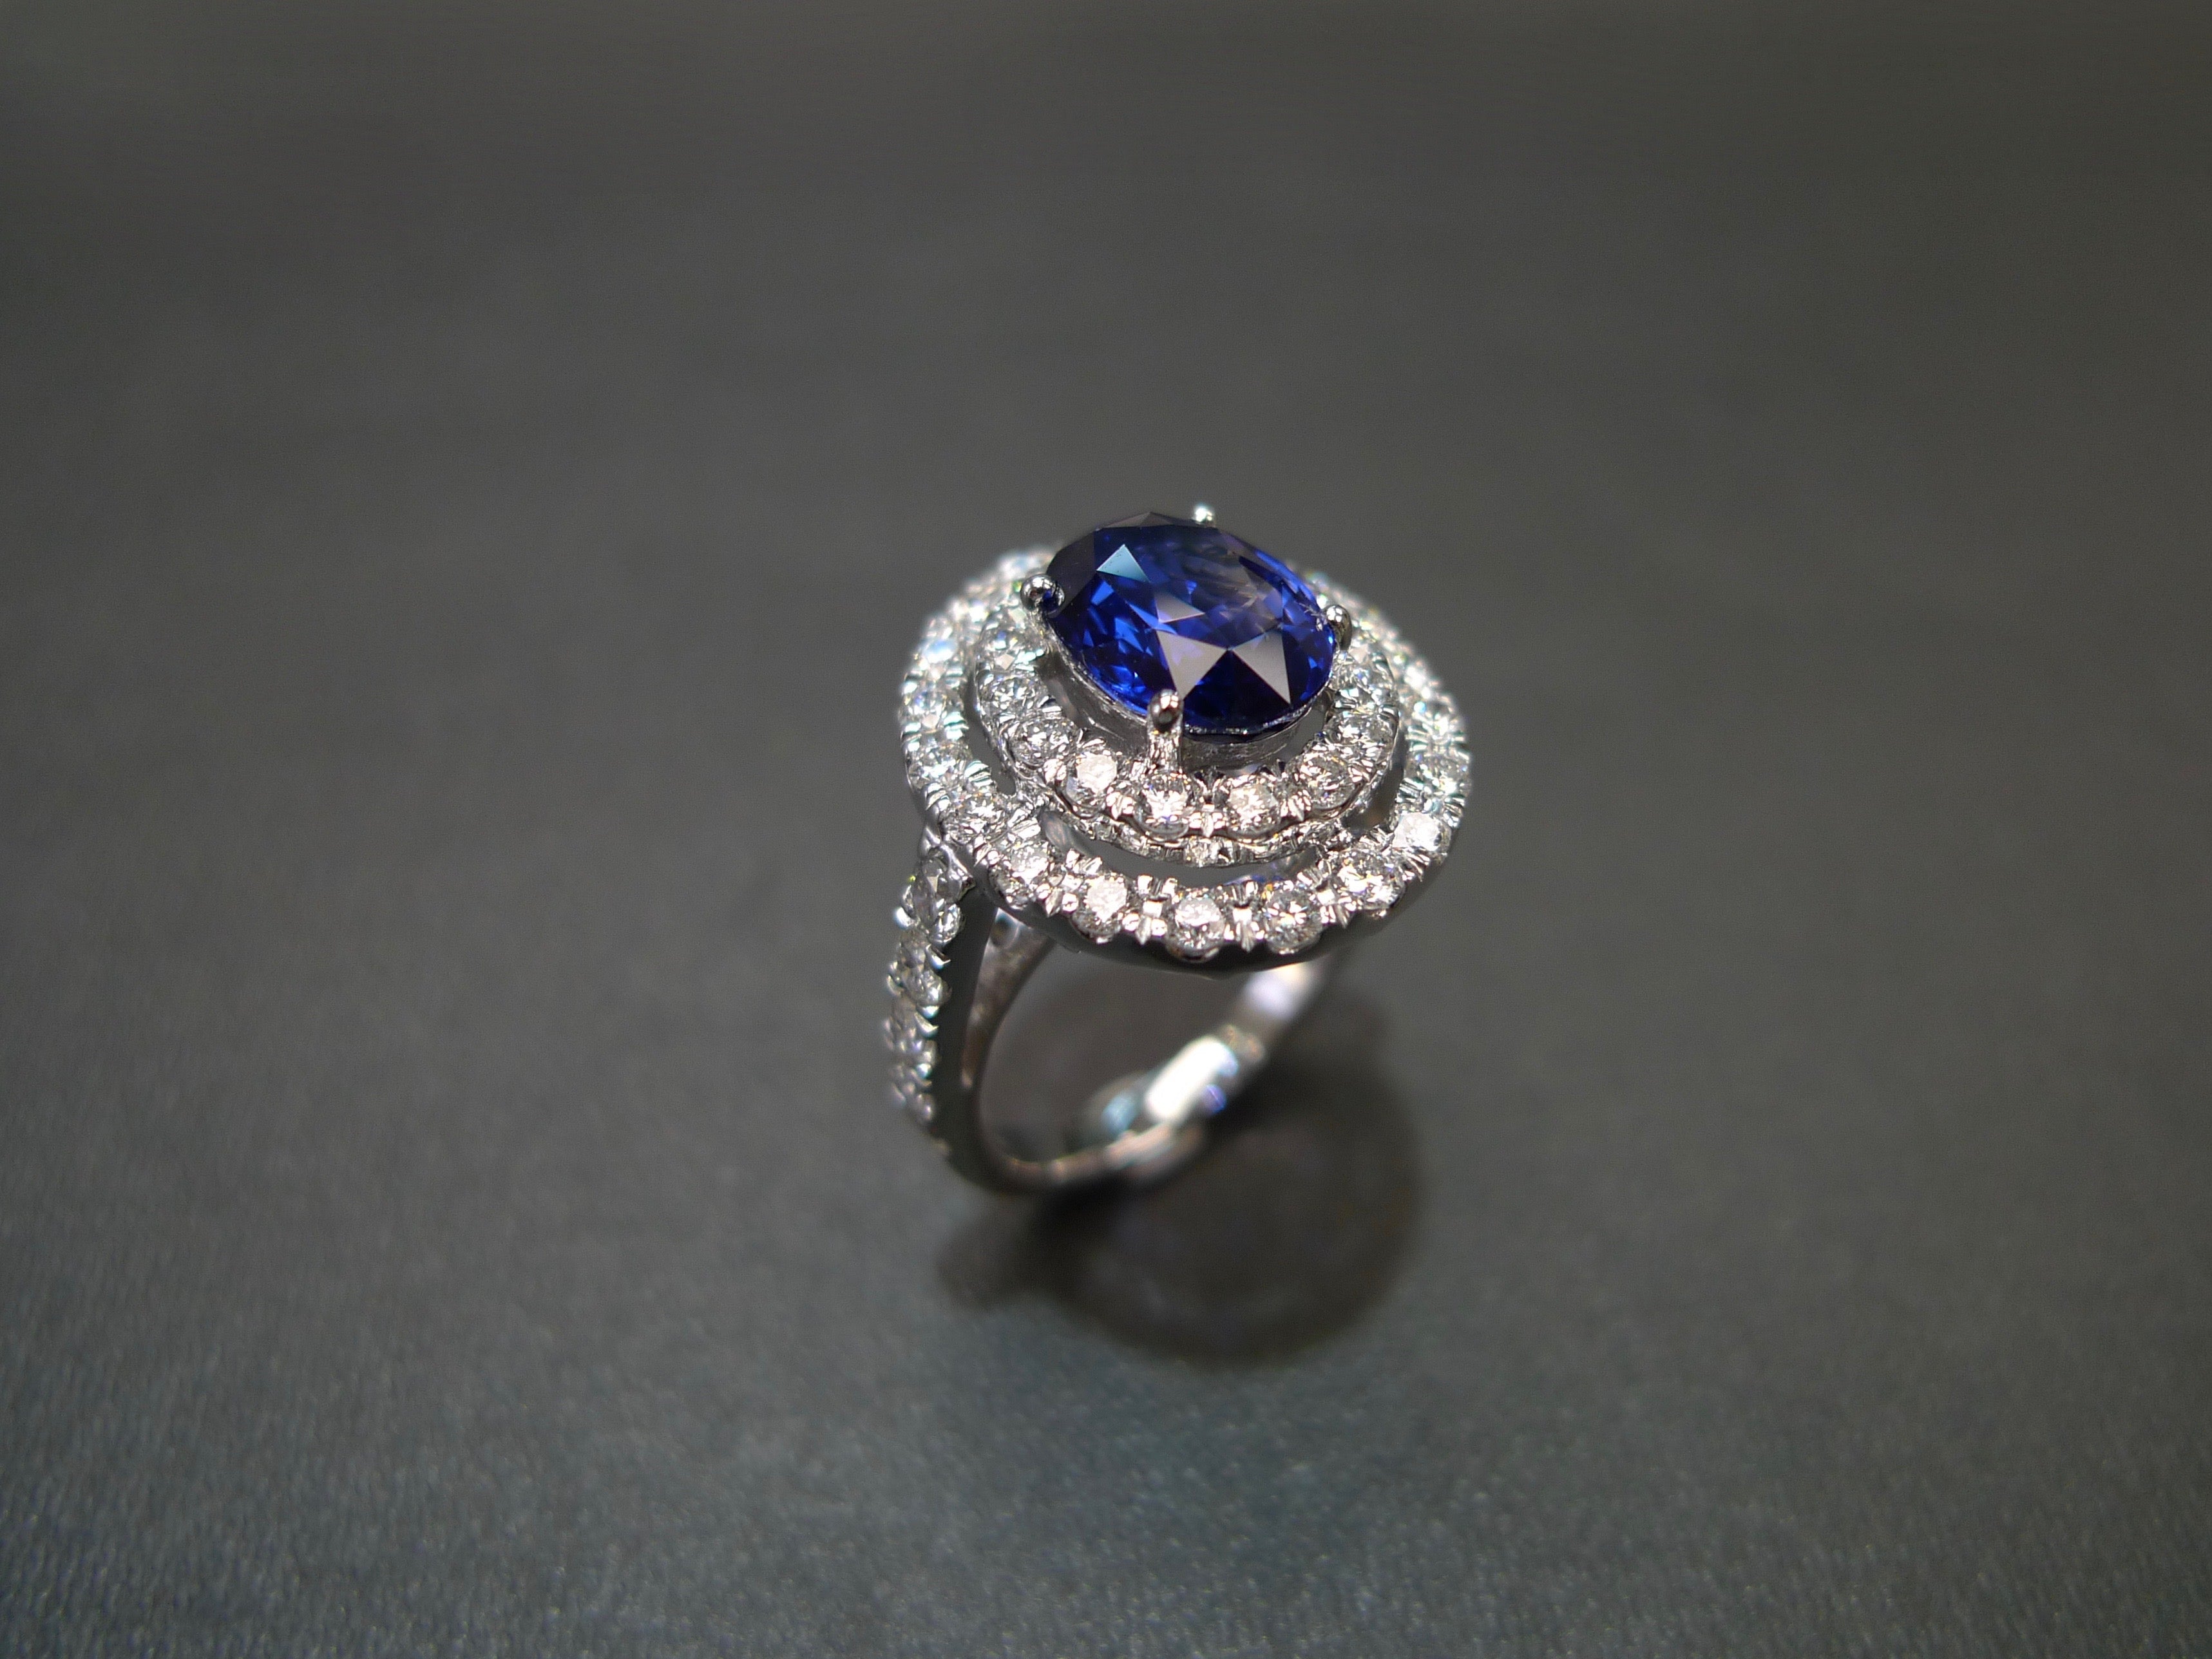 3.04ct Ceylon Blue Sapphire and Diamond Double Halo Ring in 18K White Gold - HN JEWELRY